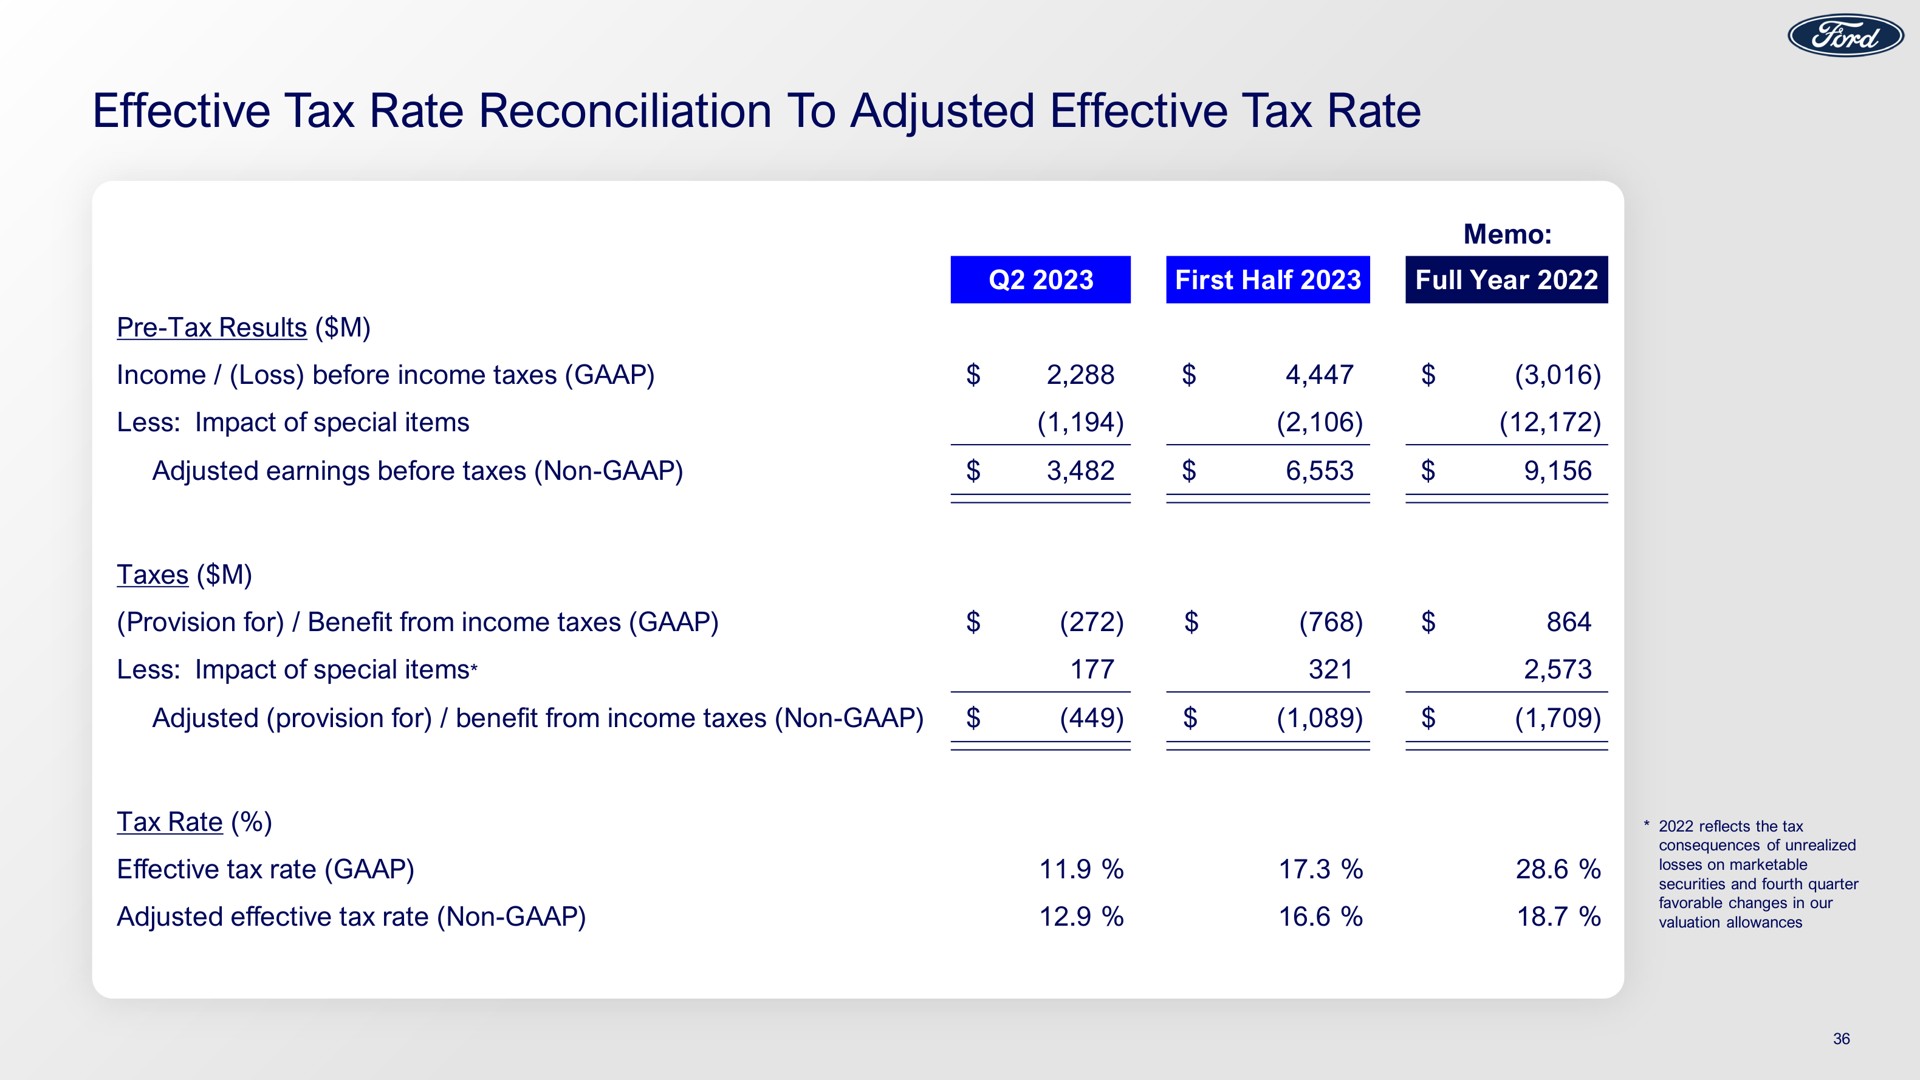 effective tax rate reconciliation to adjusted effective tax rate | Ford